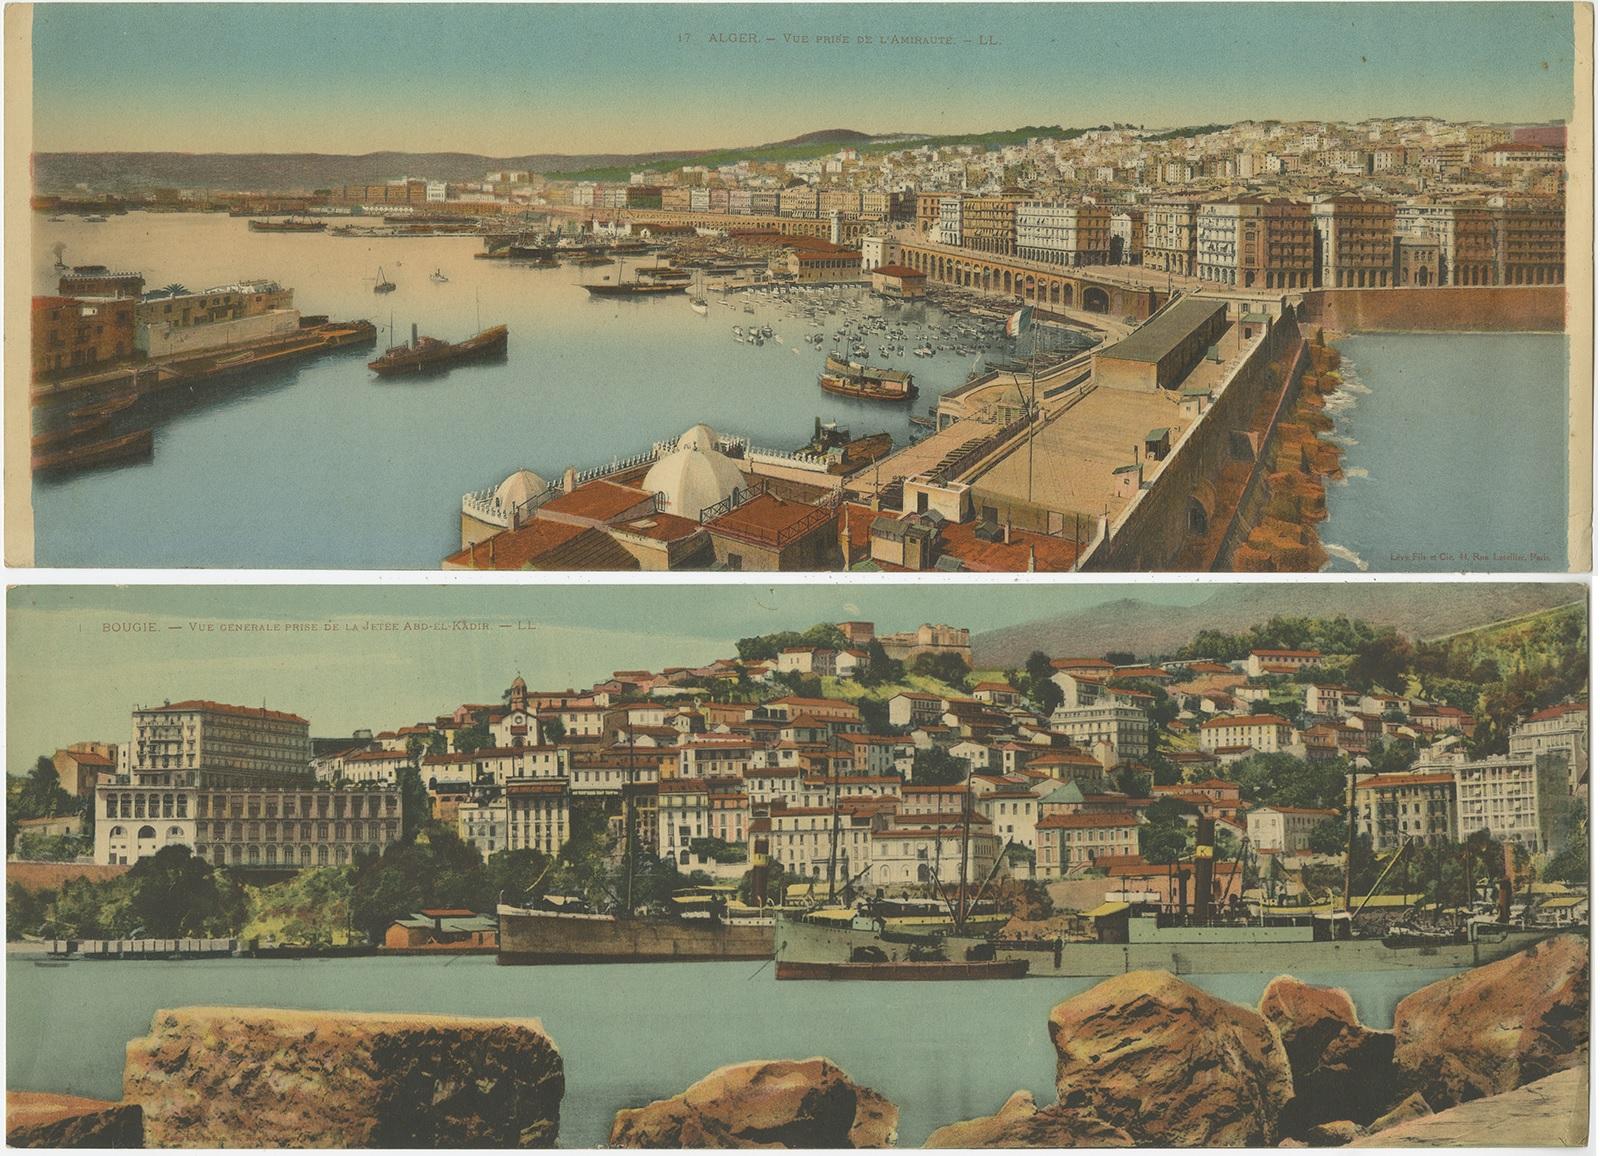 Set of two large panoramic postcards, circa 1920. It shows Béjaïa (former Bougie) and Algiers. Published by Lévy.